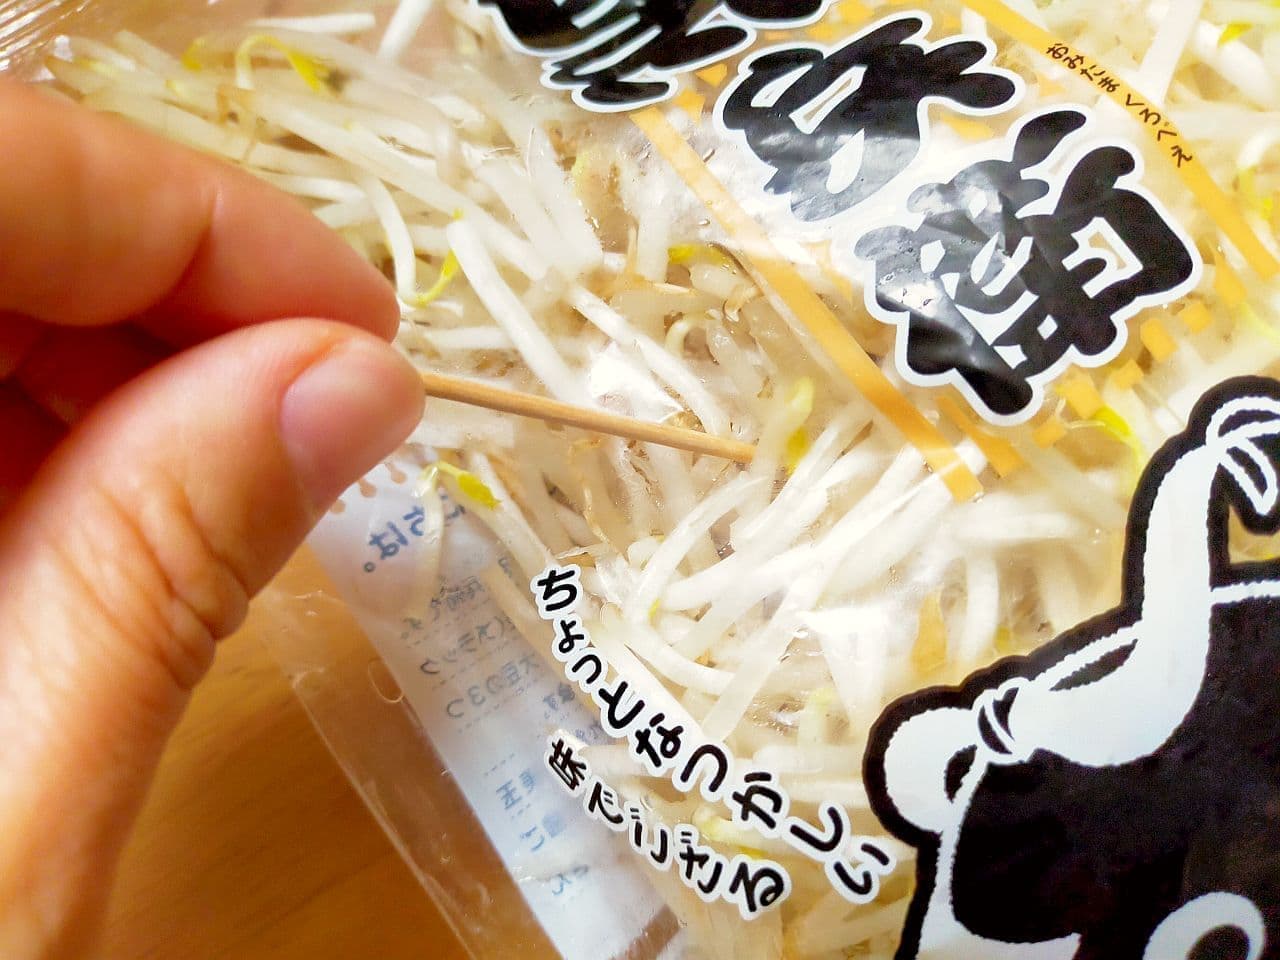 Step 3: How to Store Bean Sprouts for Longer Life